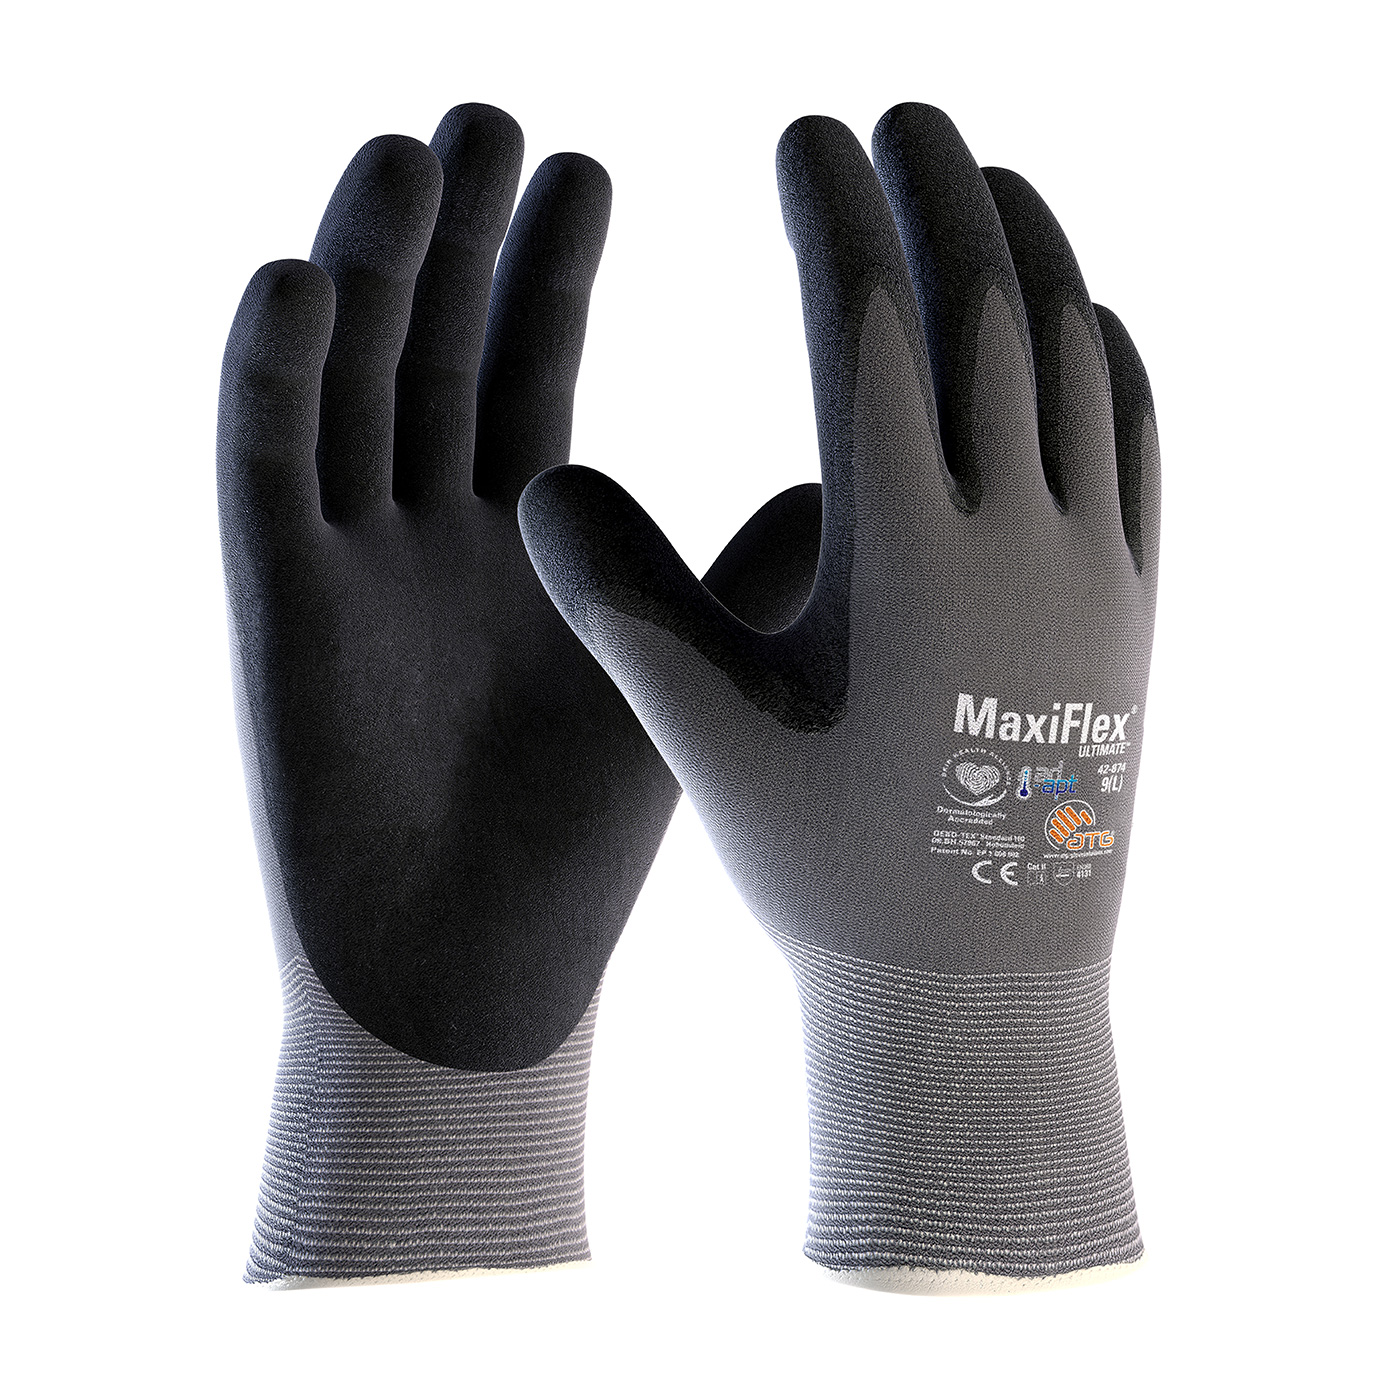 PIP® MaxiFlex® Ultimate™  AD-APT® 
Seamless Knit Nylon / Lycra Glove with Nitrile Coated MicroFoam Grip on fingertips and palm